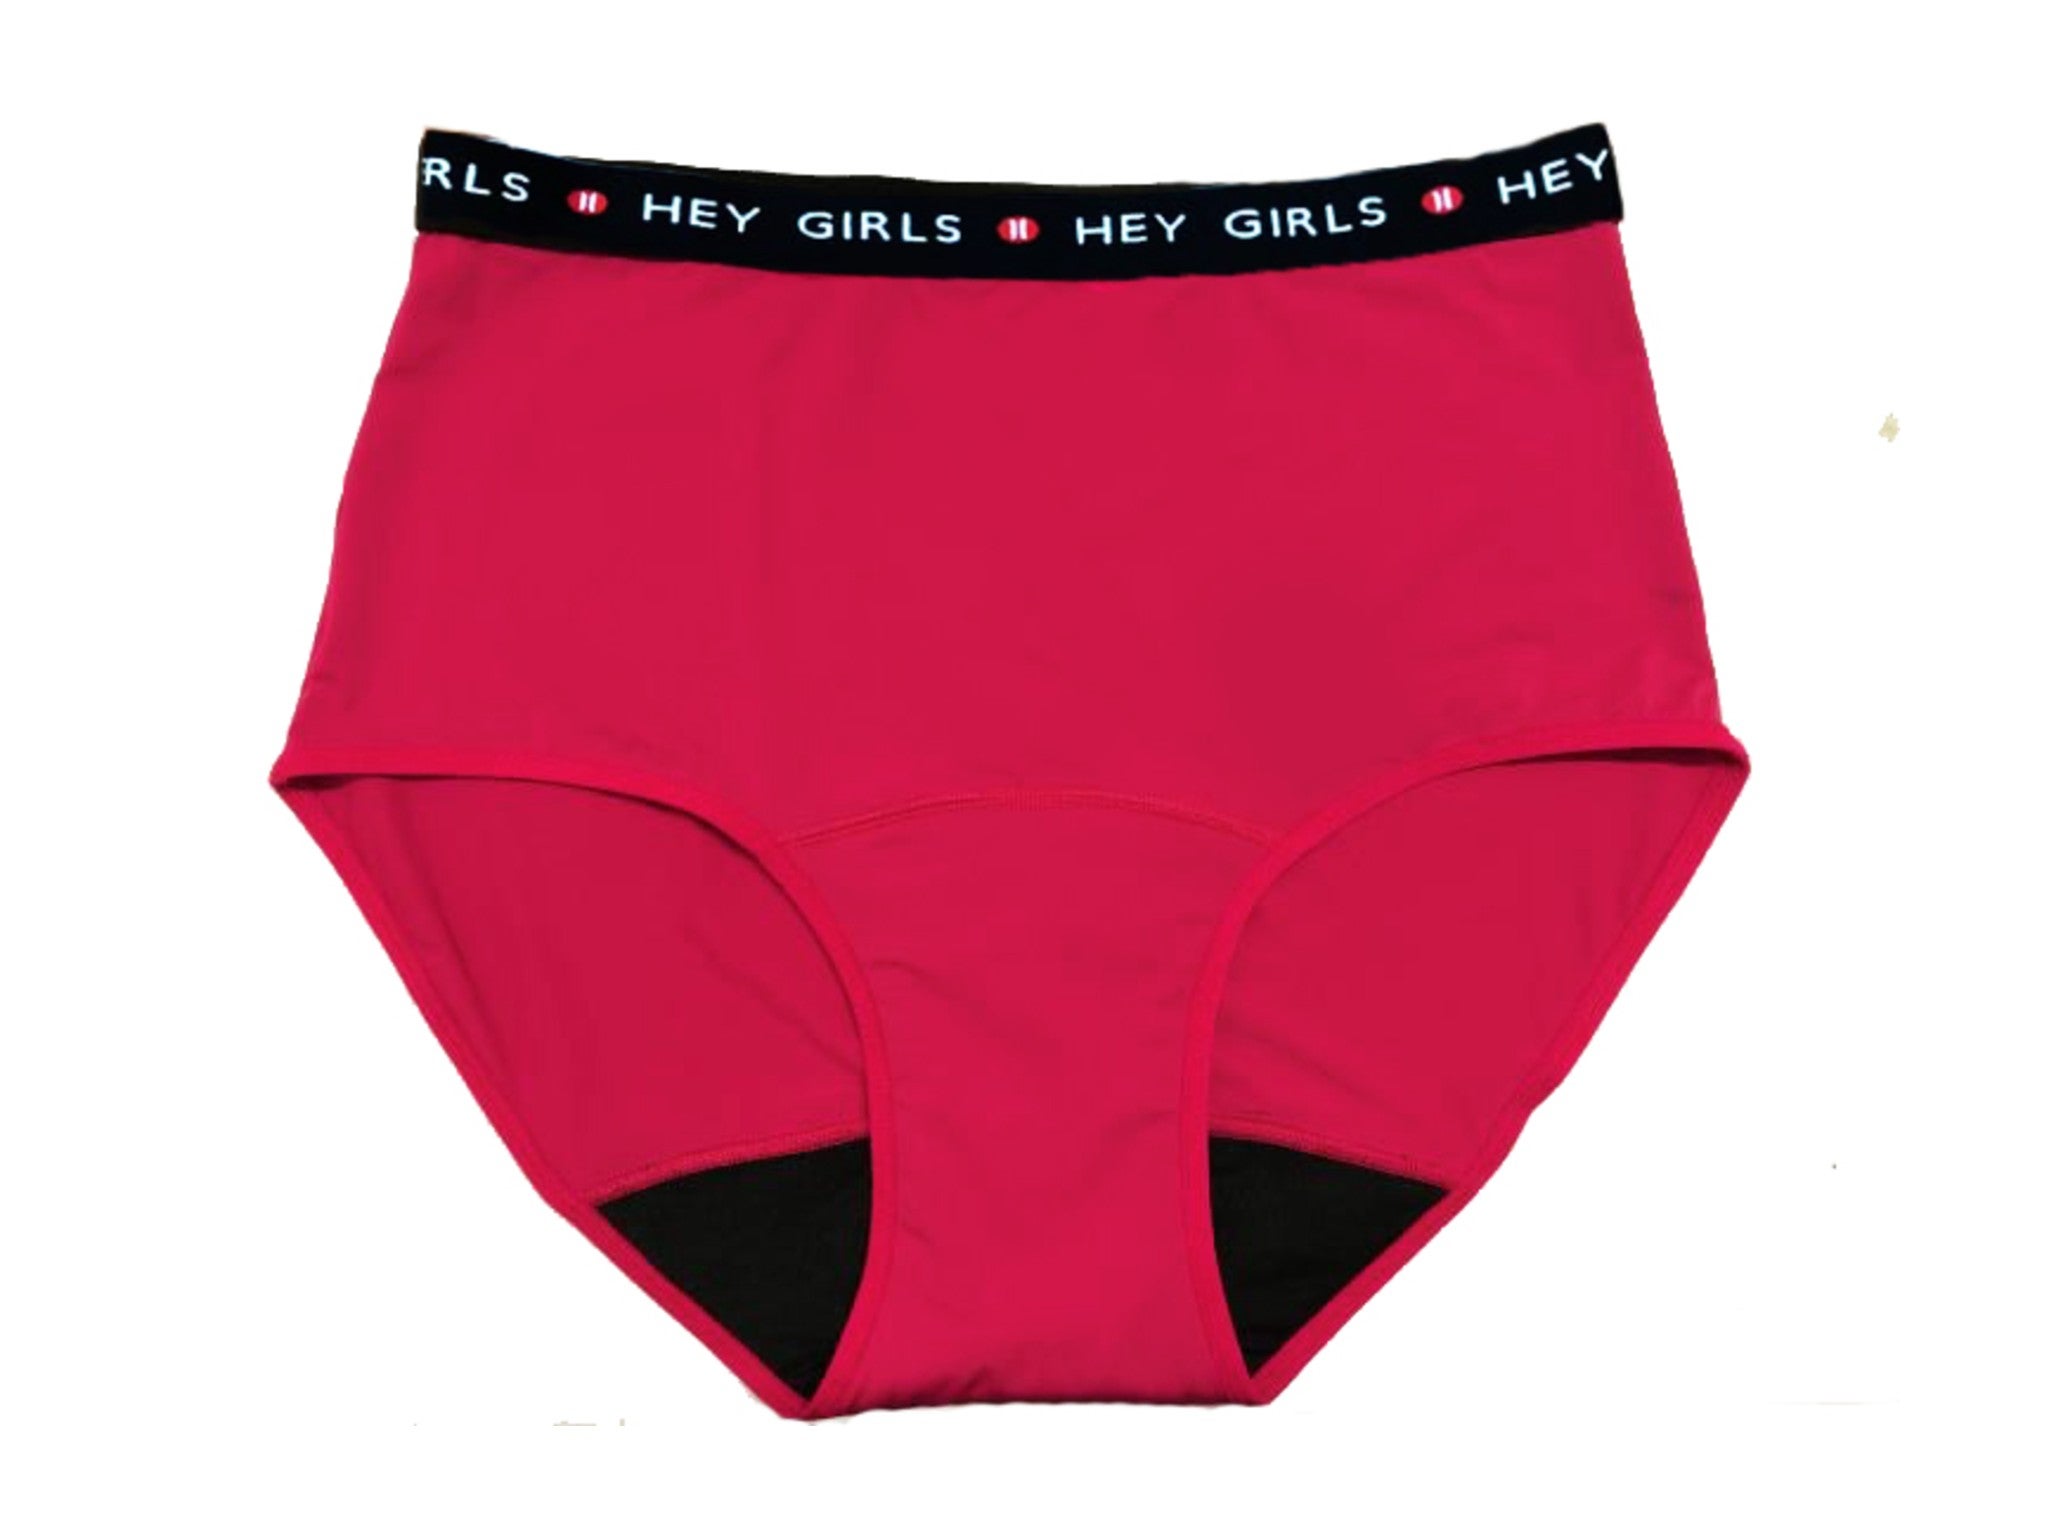 Hey%20Girls%20super%20soft%20red%20cherry%20period%20pants%20indybest